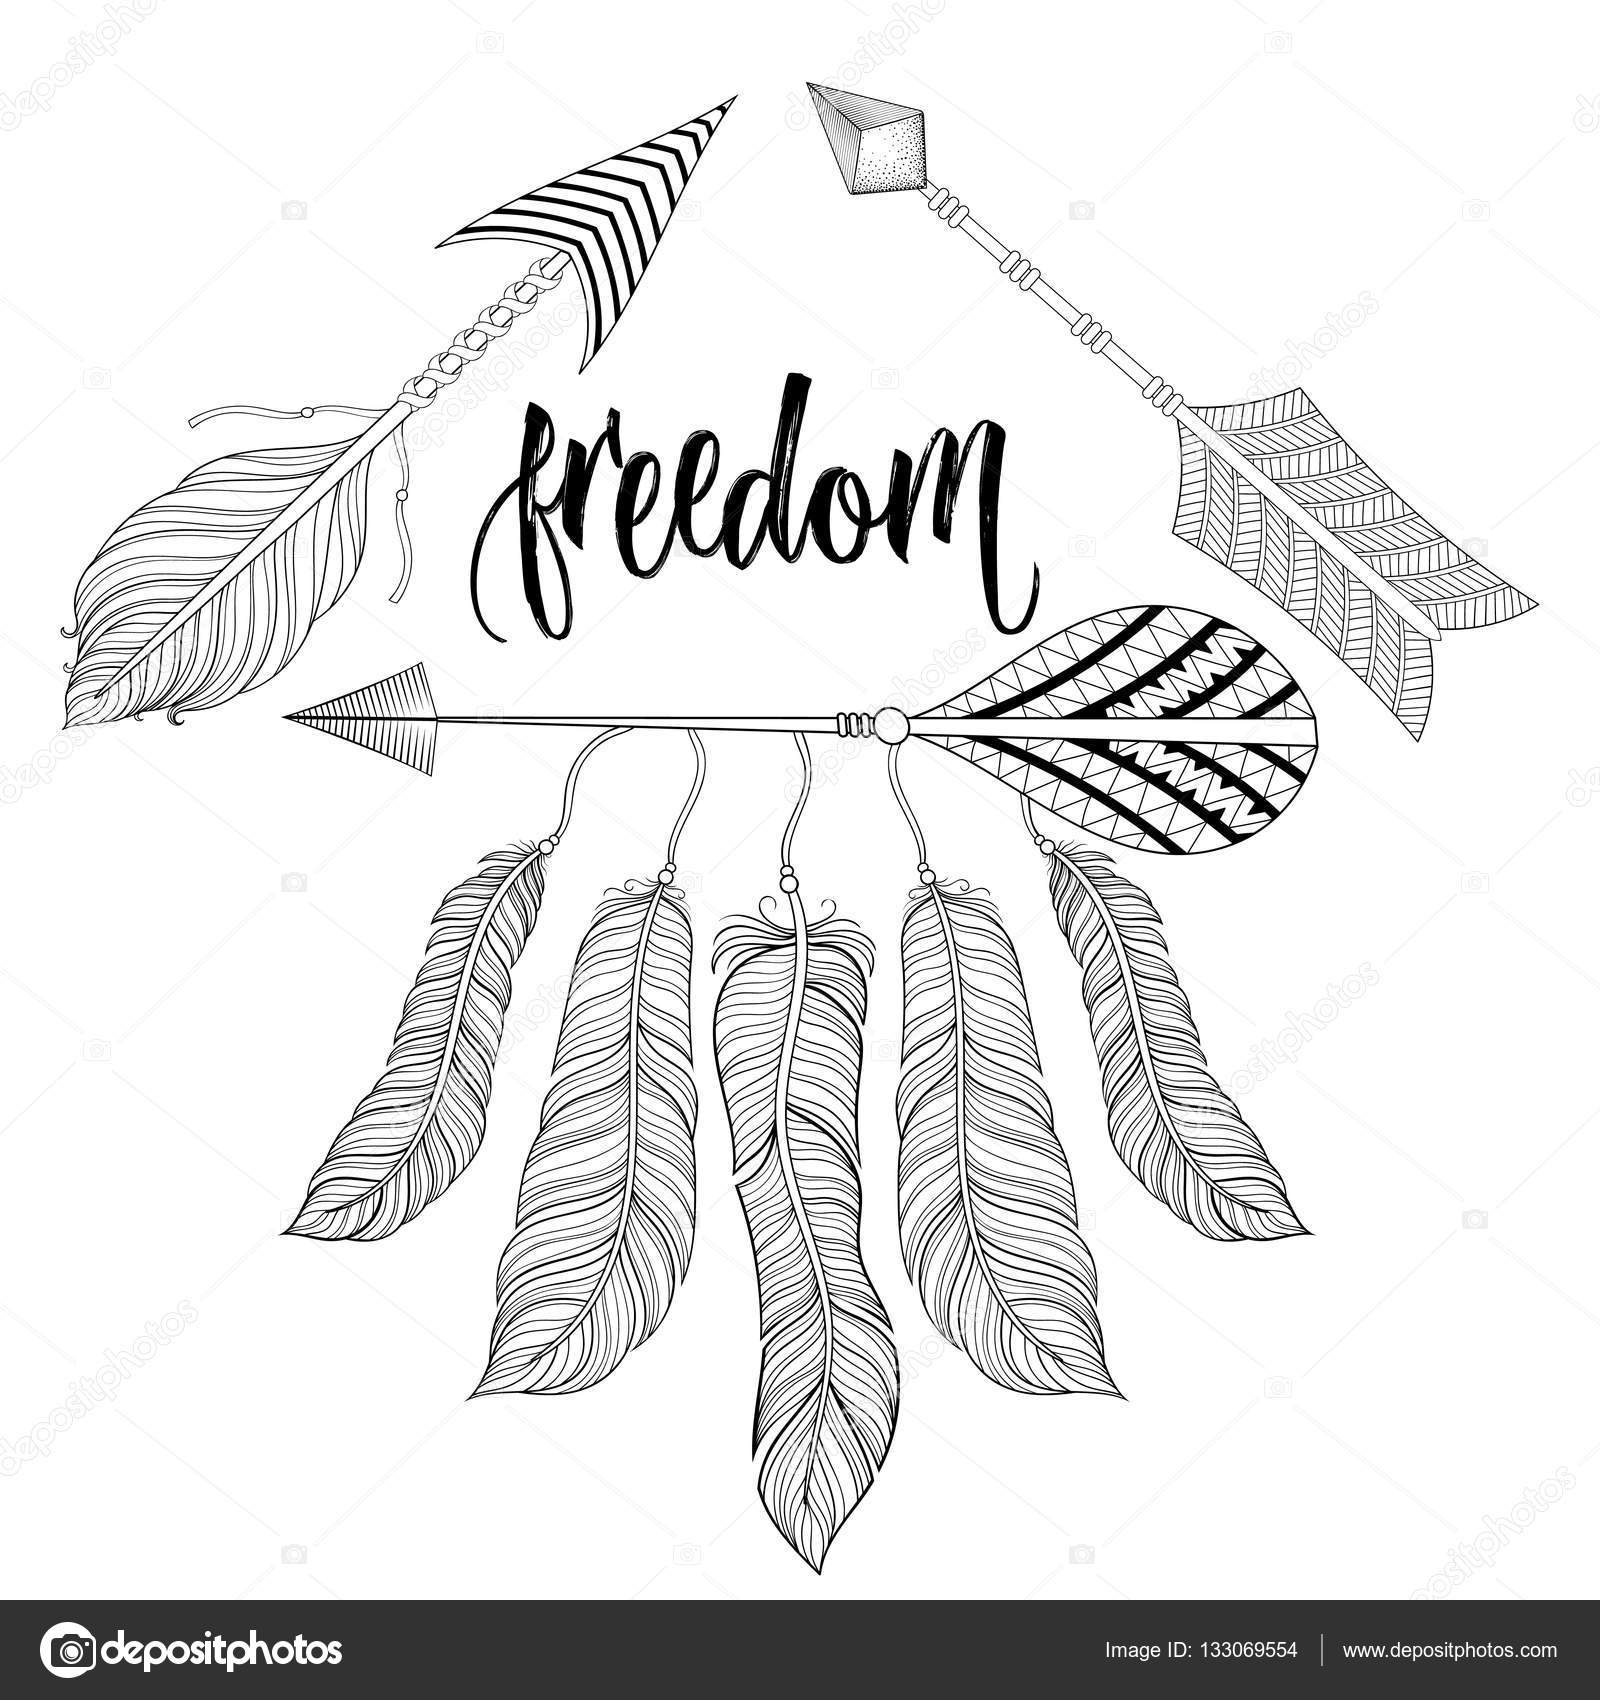 Boho chic ethnic Dreamcatcher with Feathers Arrows freedom calligraphy hipster concept American native style zentangle illustration for adult coloring